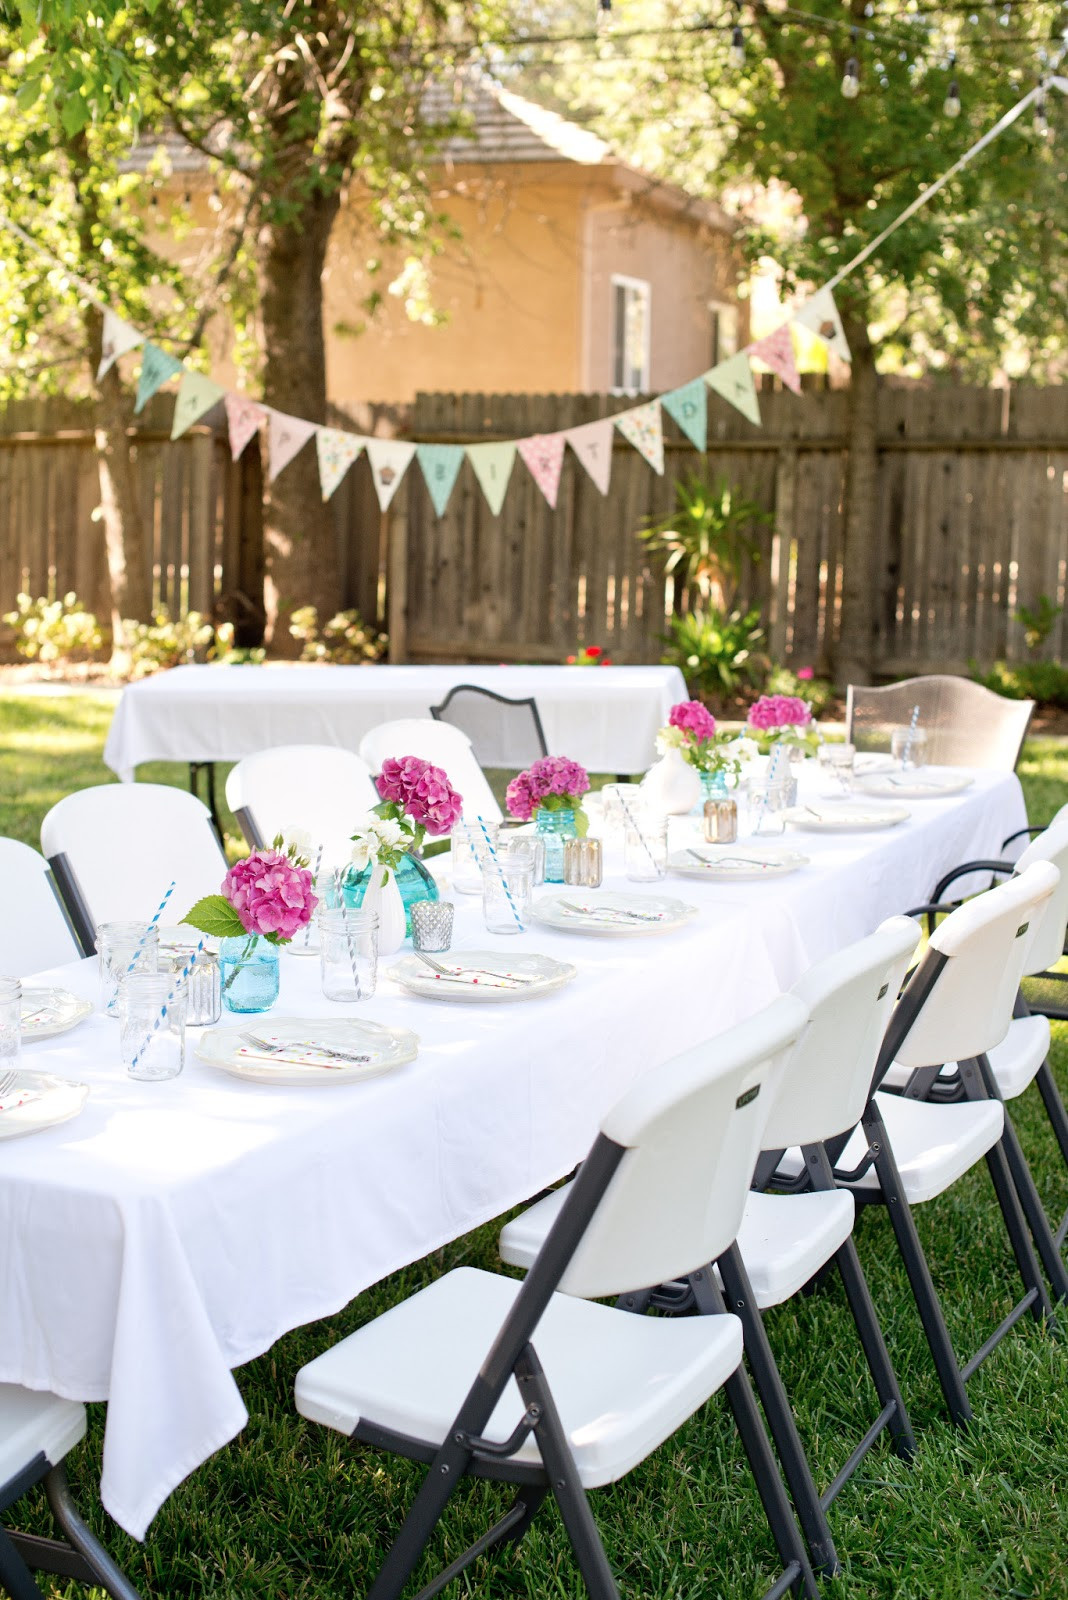 Birthday Party Ideas Backyard
 Backyard Party Decorations For Unfor table Moments